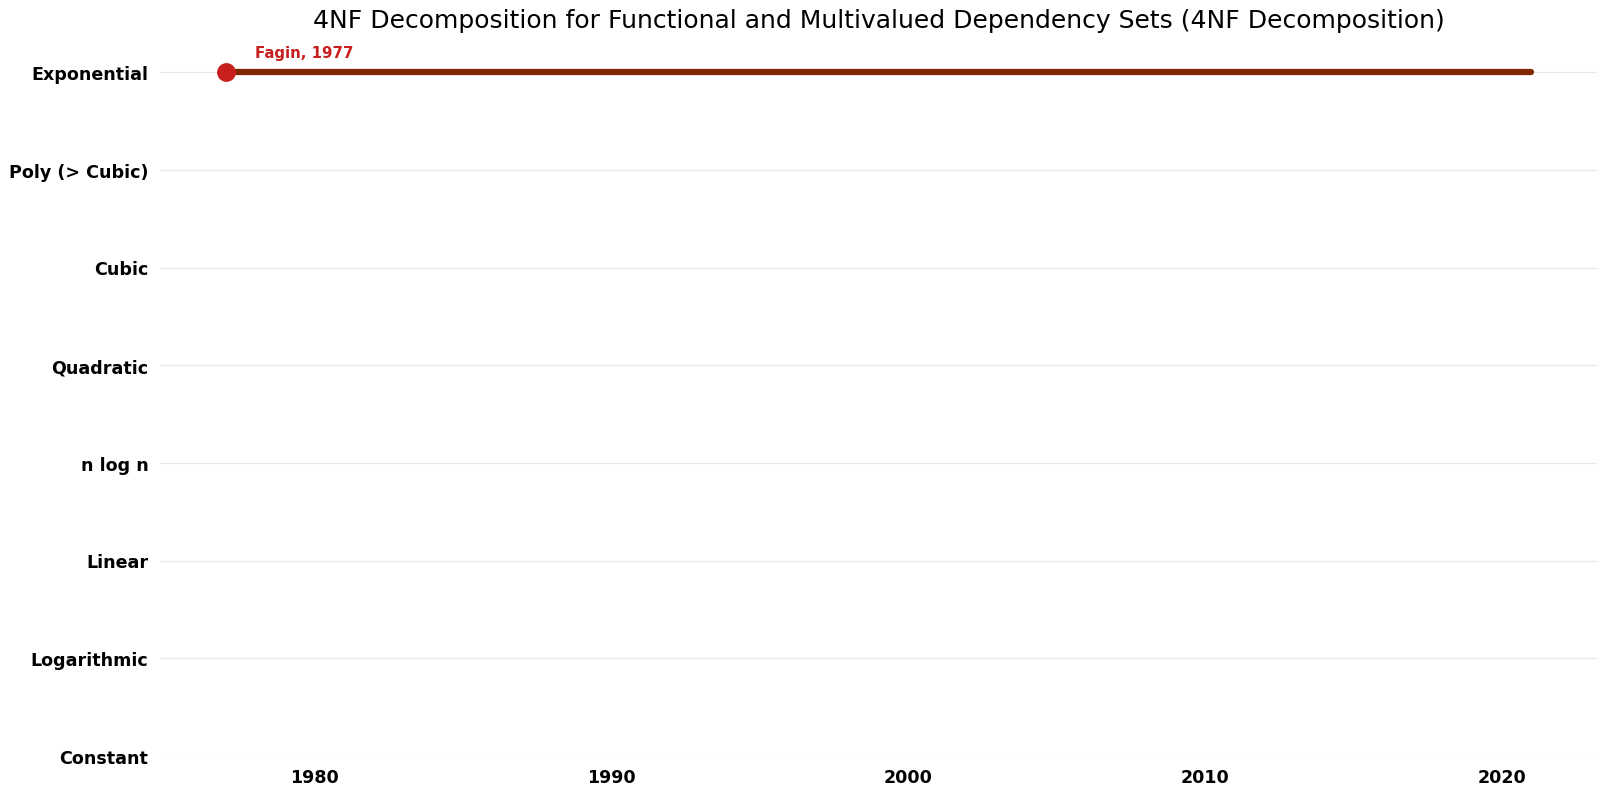 File:4NF Decomposition - 4NF Decomposition for Functional and Multivalued Dependency Sets - Time.png